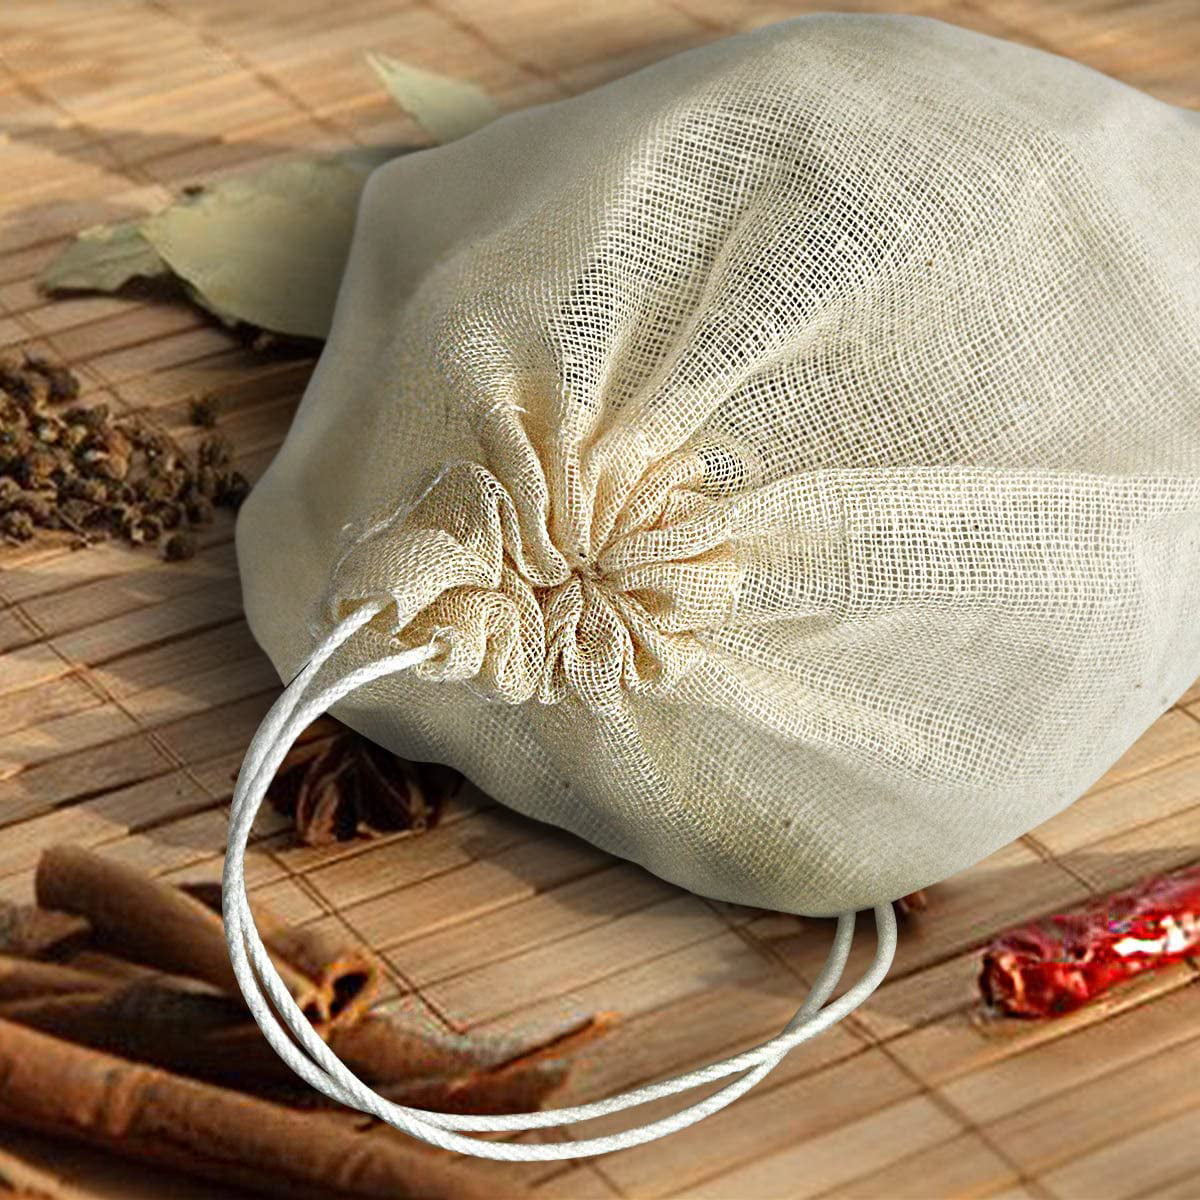 Great for Tea Spices Broth Gravy Stew & Soup Details about   Norpro Reusable Brew Bags 4 pack 